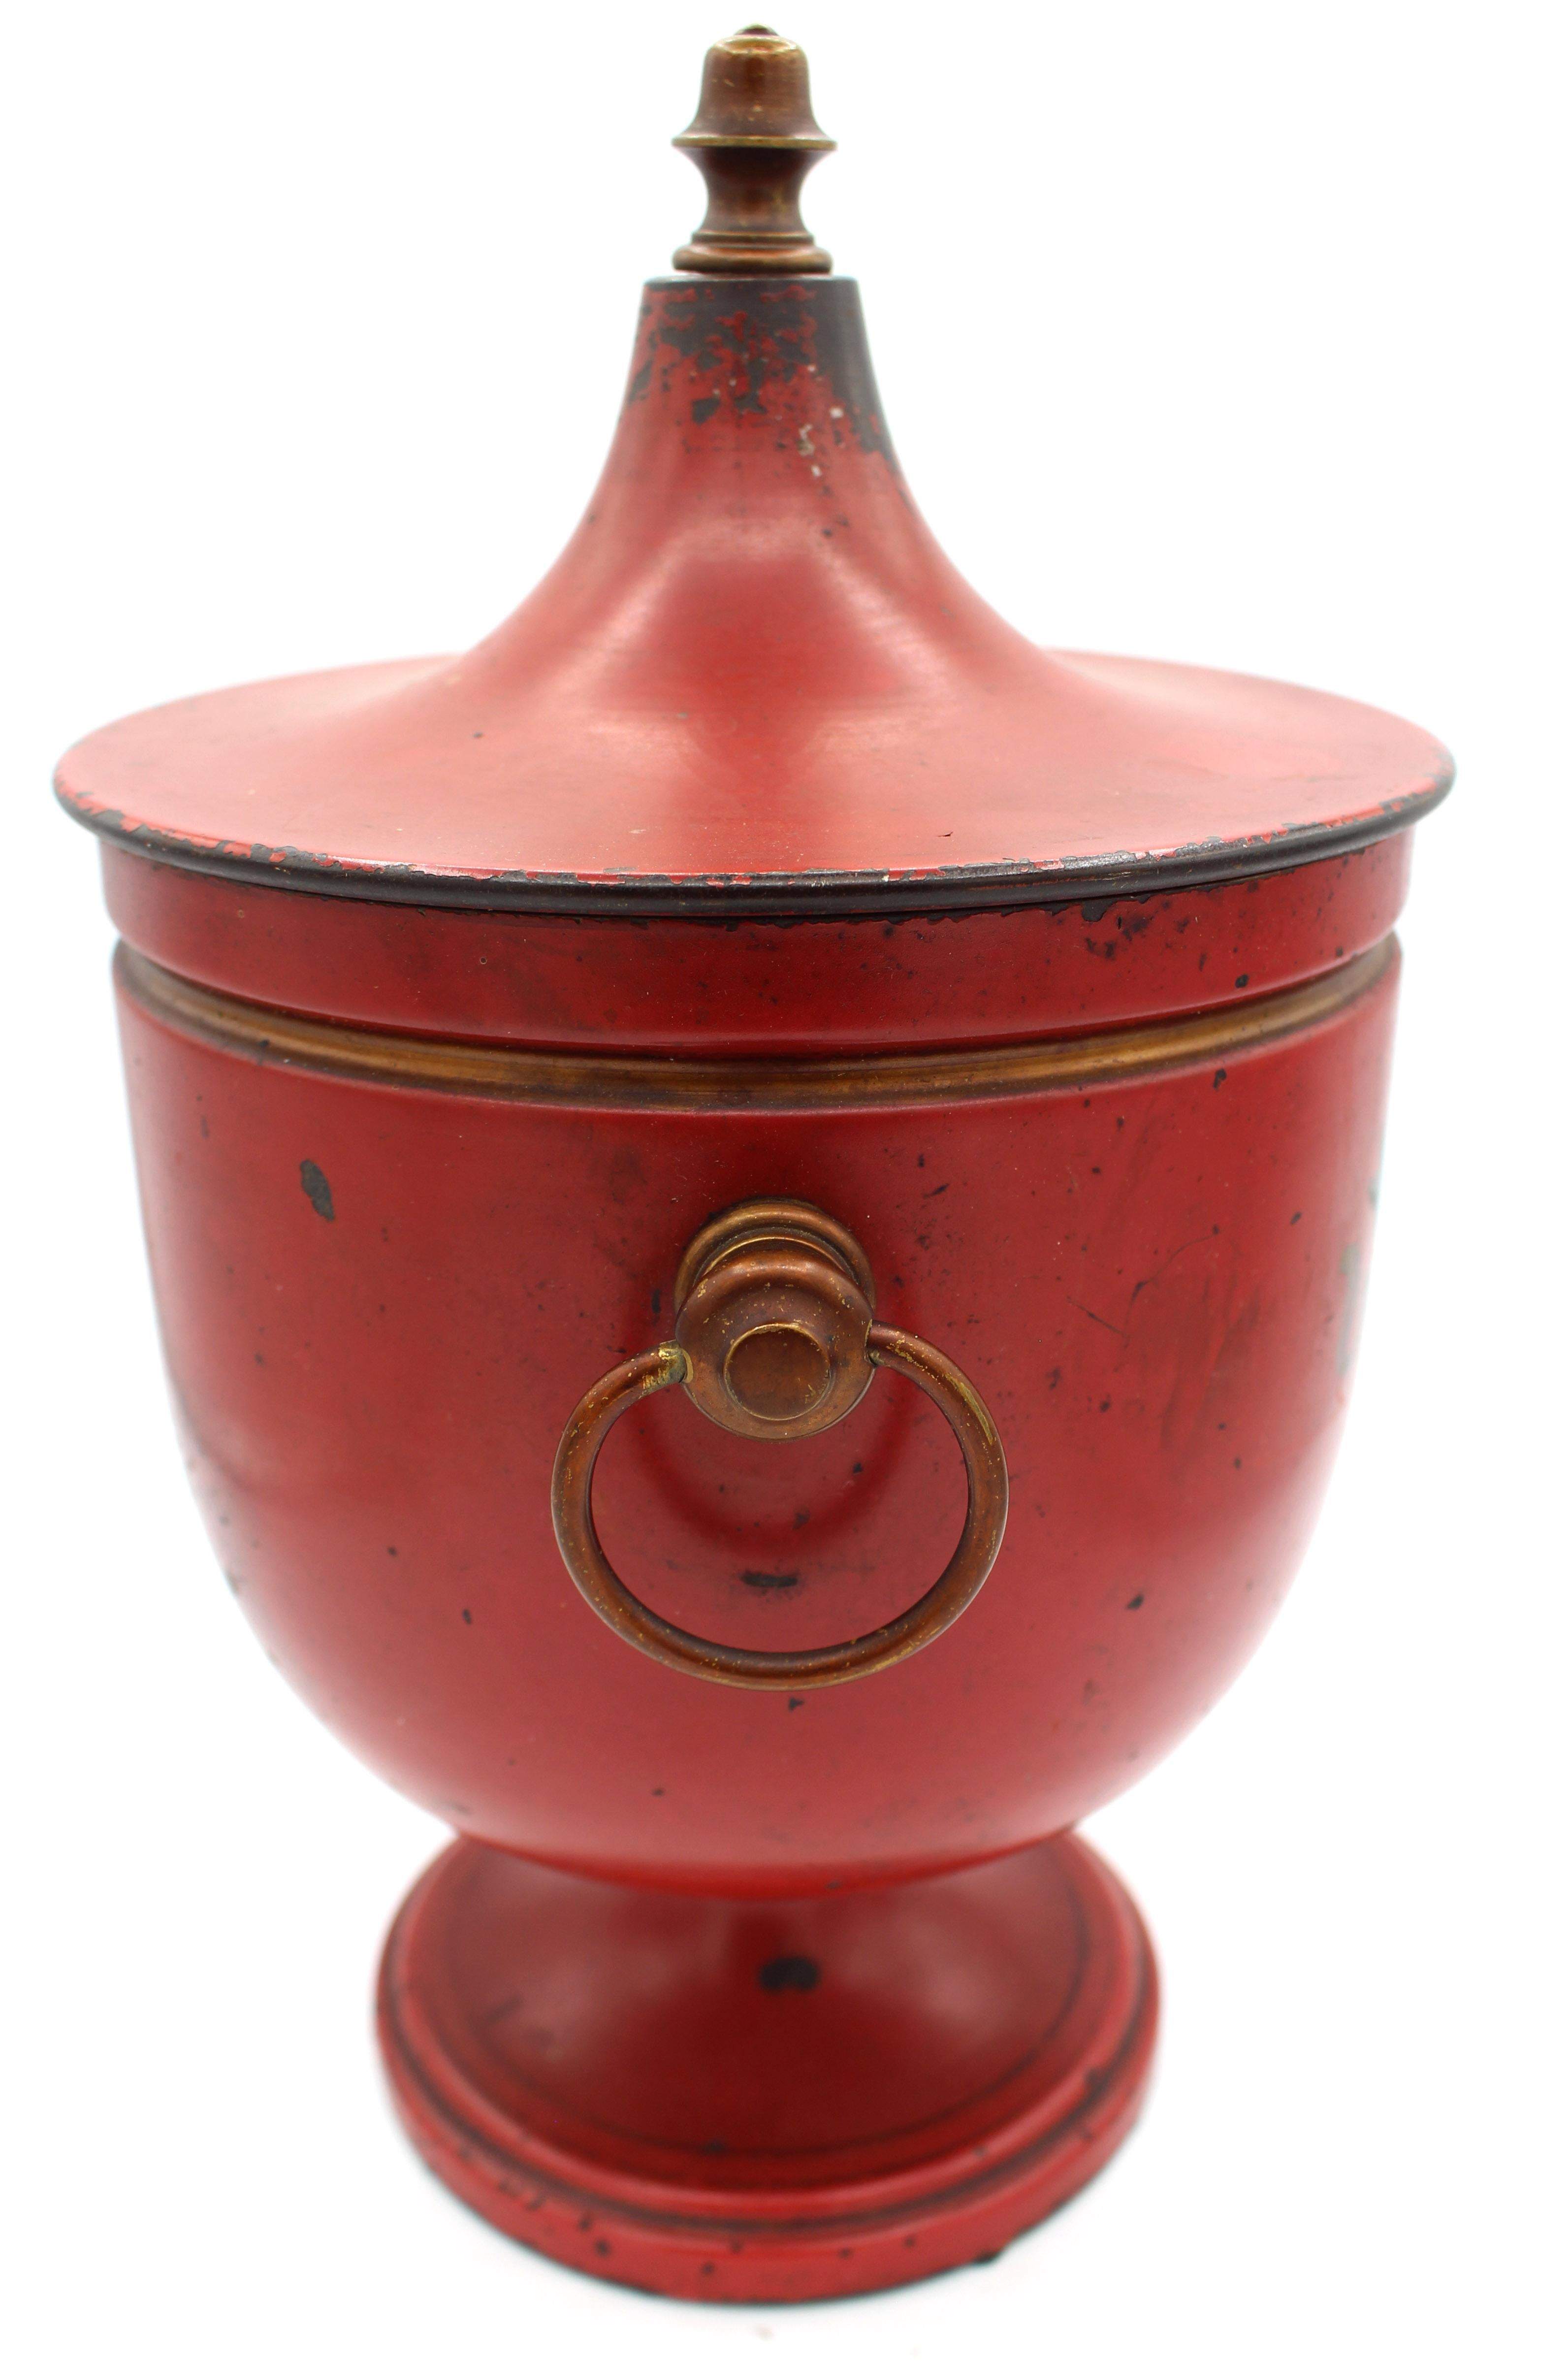 Circa 1880s French Scarlet & Gilt Tole Covered Urn In Good Condition For Sale In Chapel Hill, NC